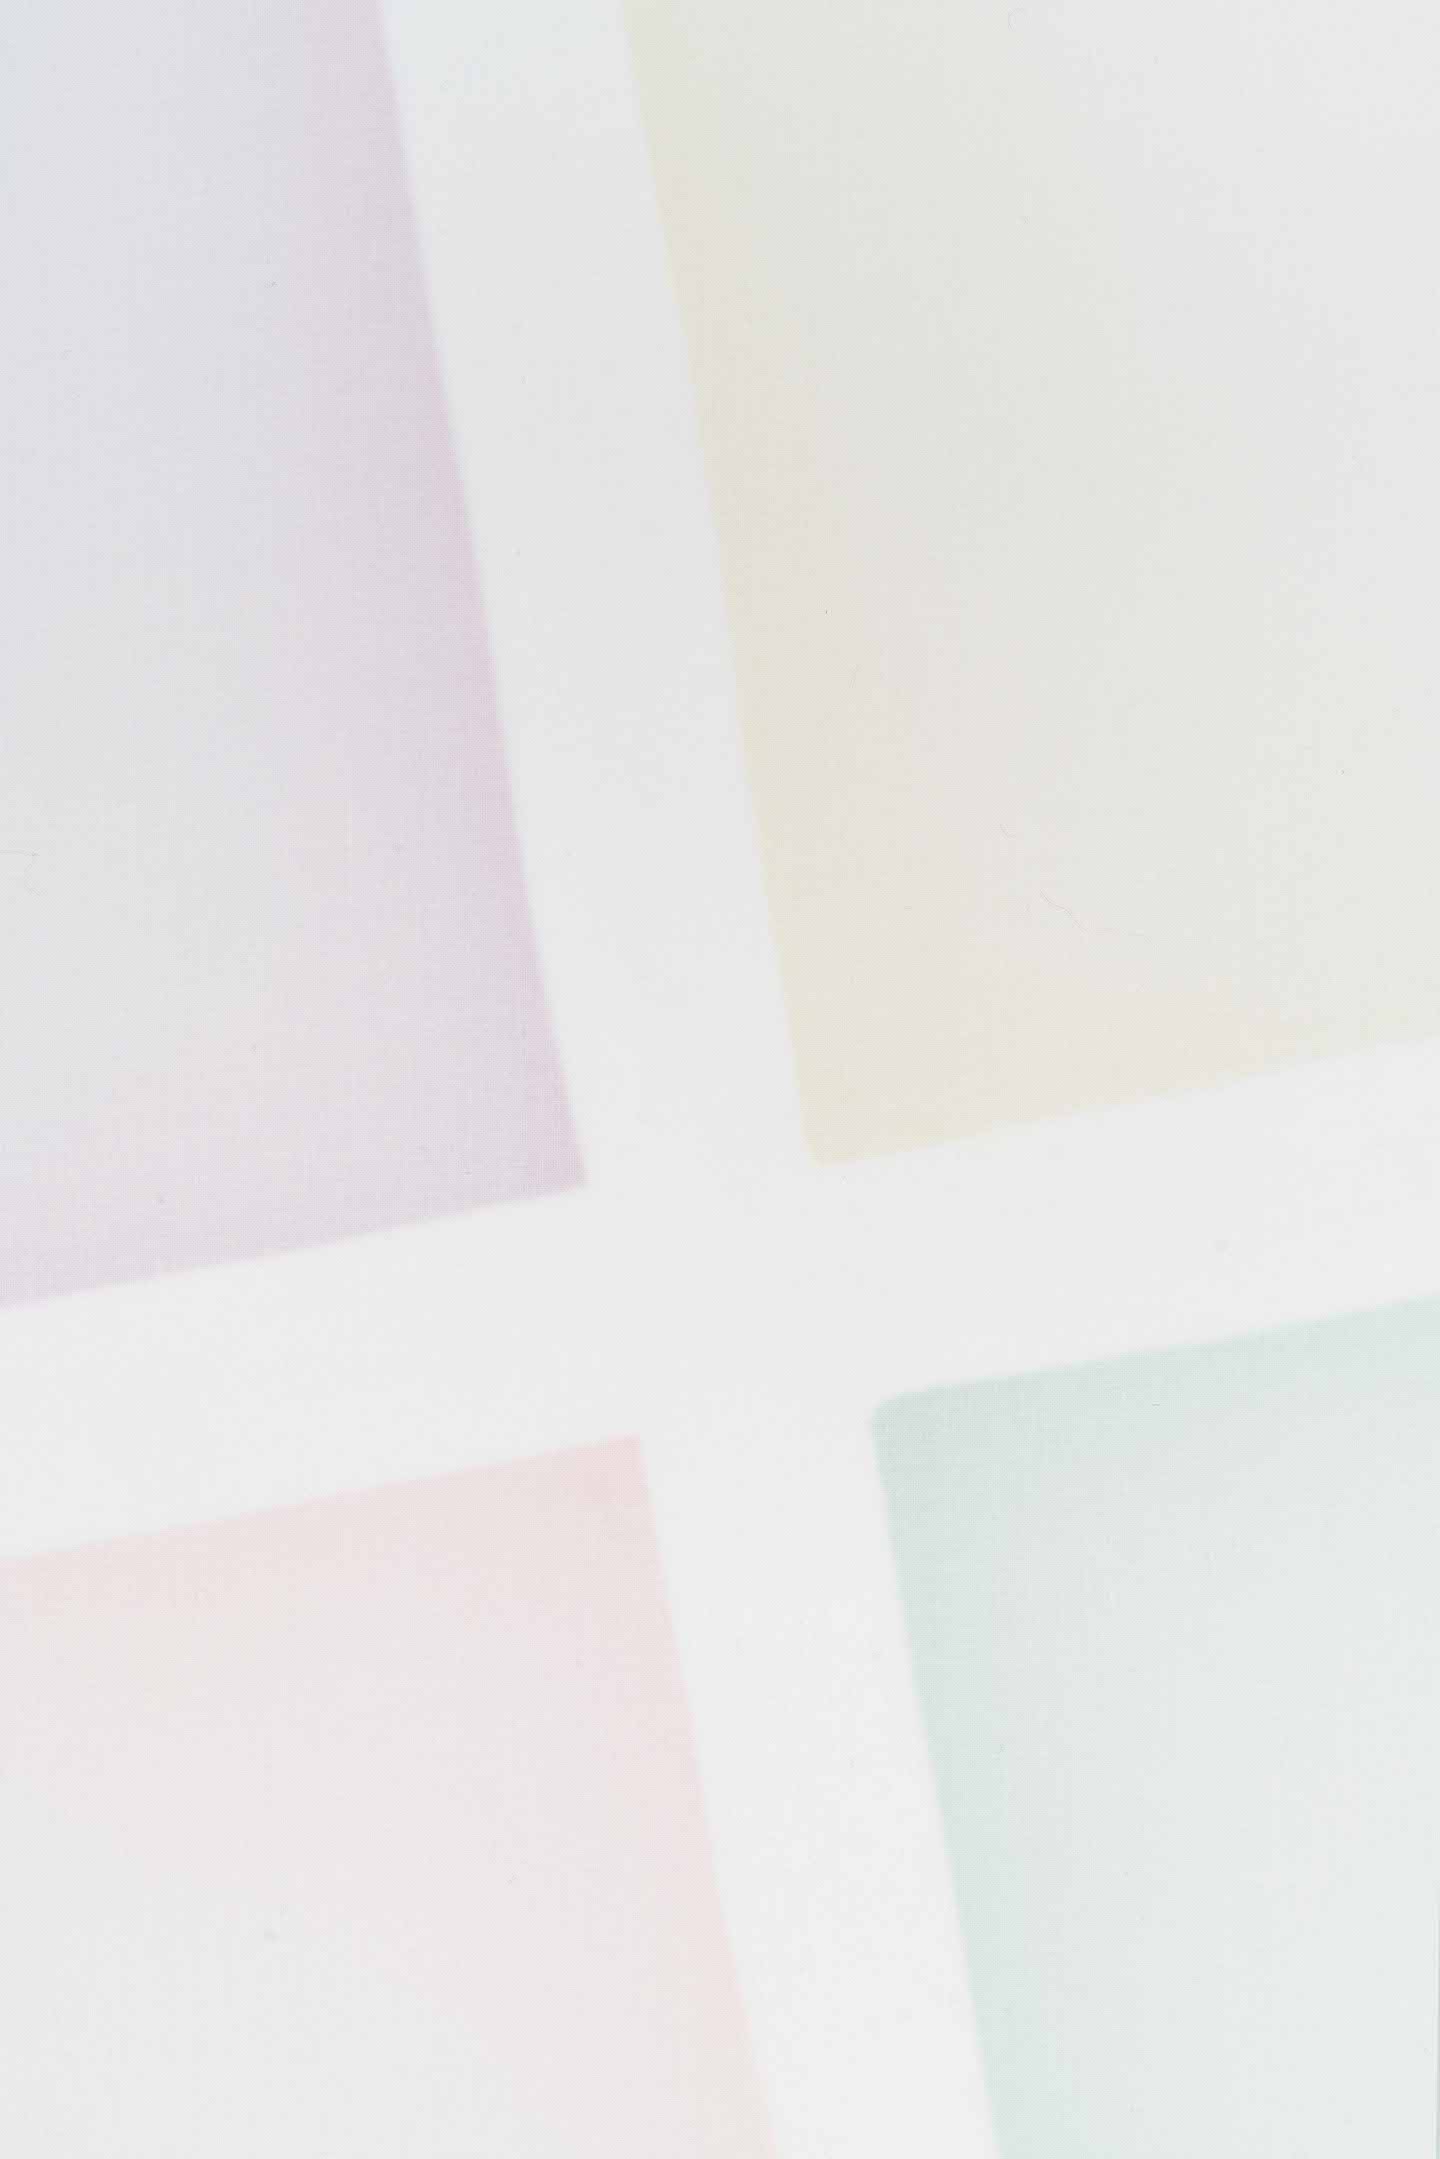 Series of rectangular shapes in various pastel colors against a white background